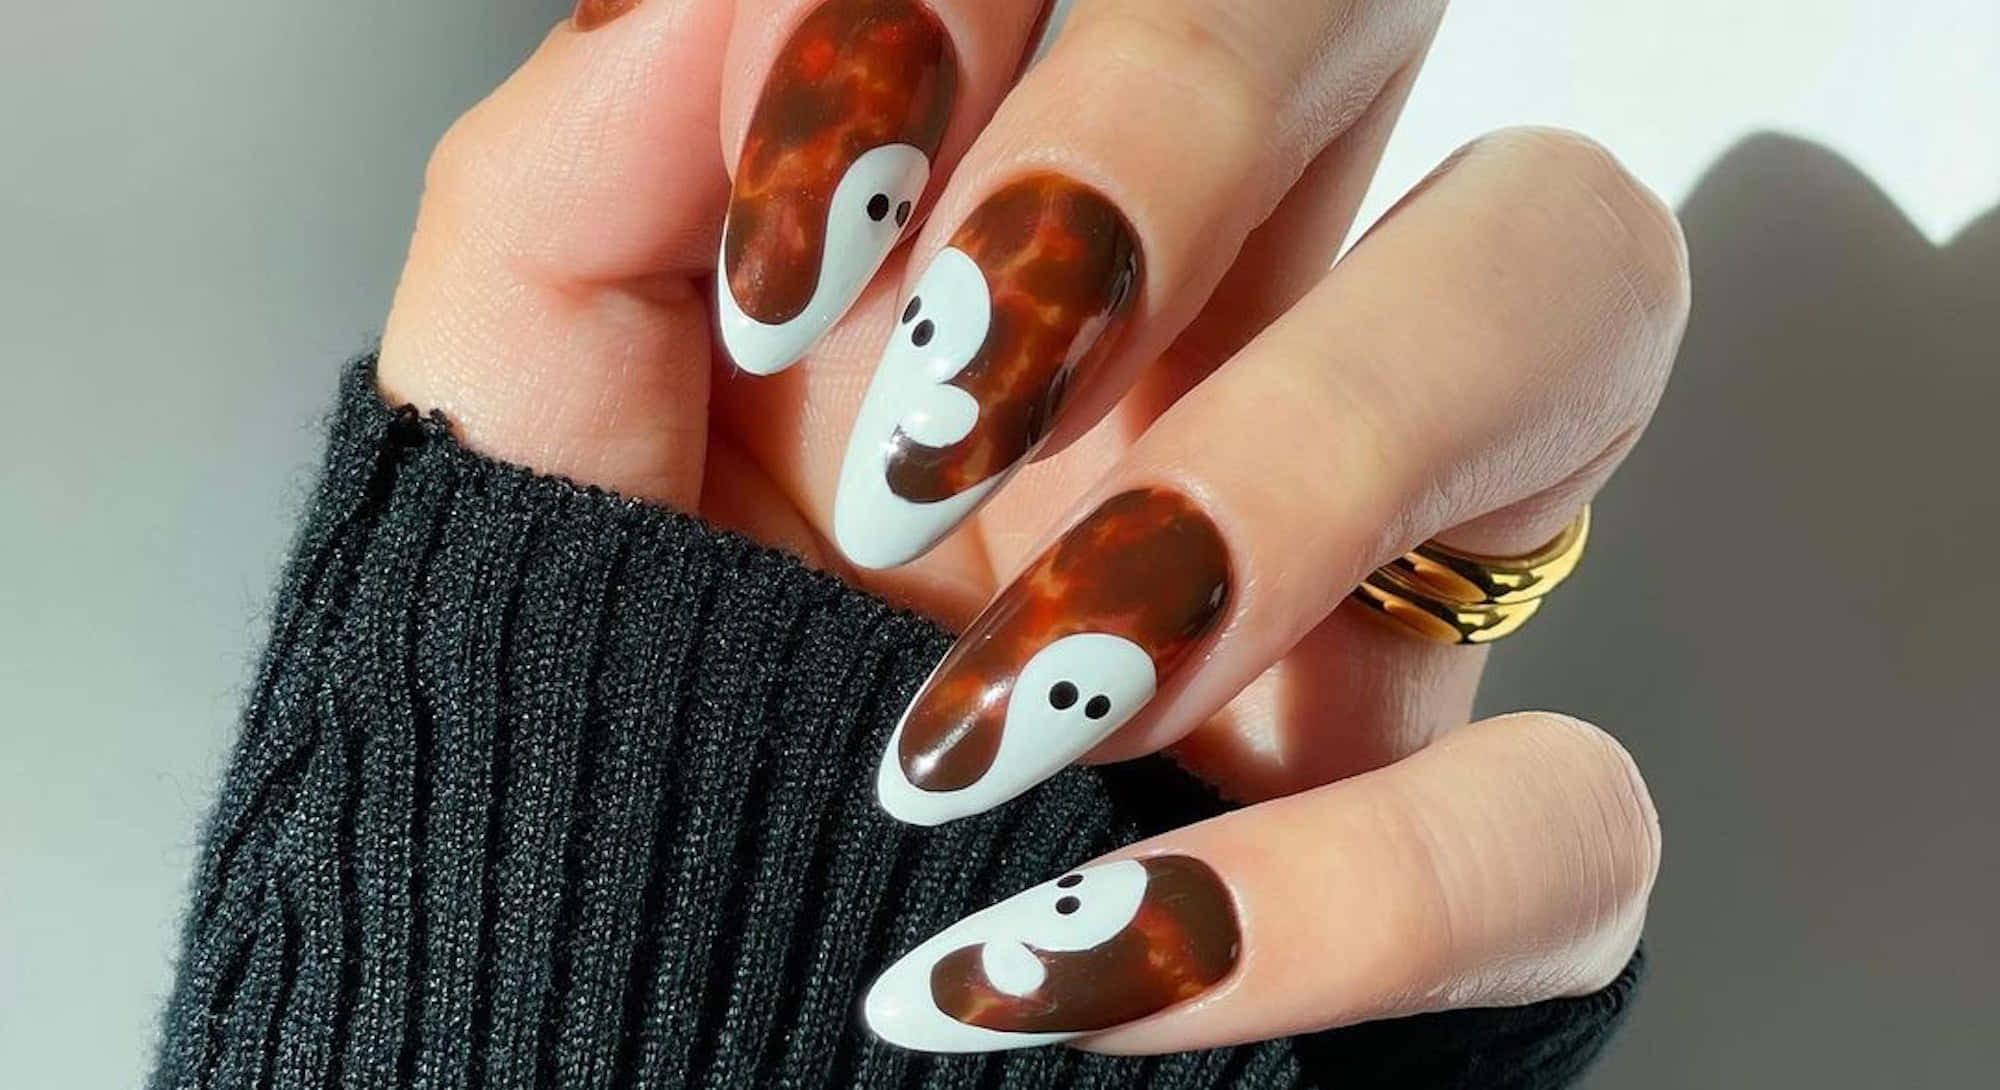 Get festive this Halloween with spooky and stylish nail art. Wallpaper